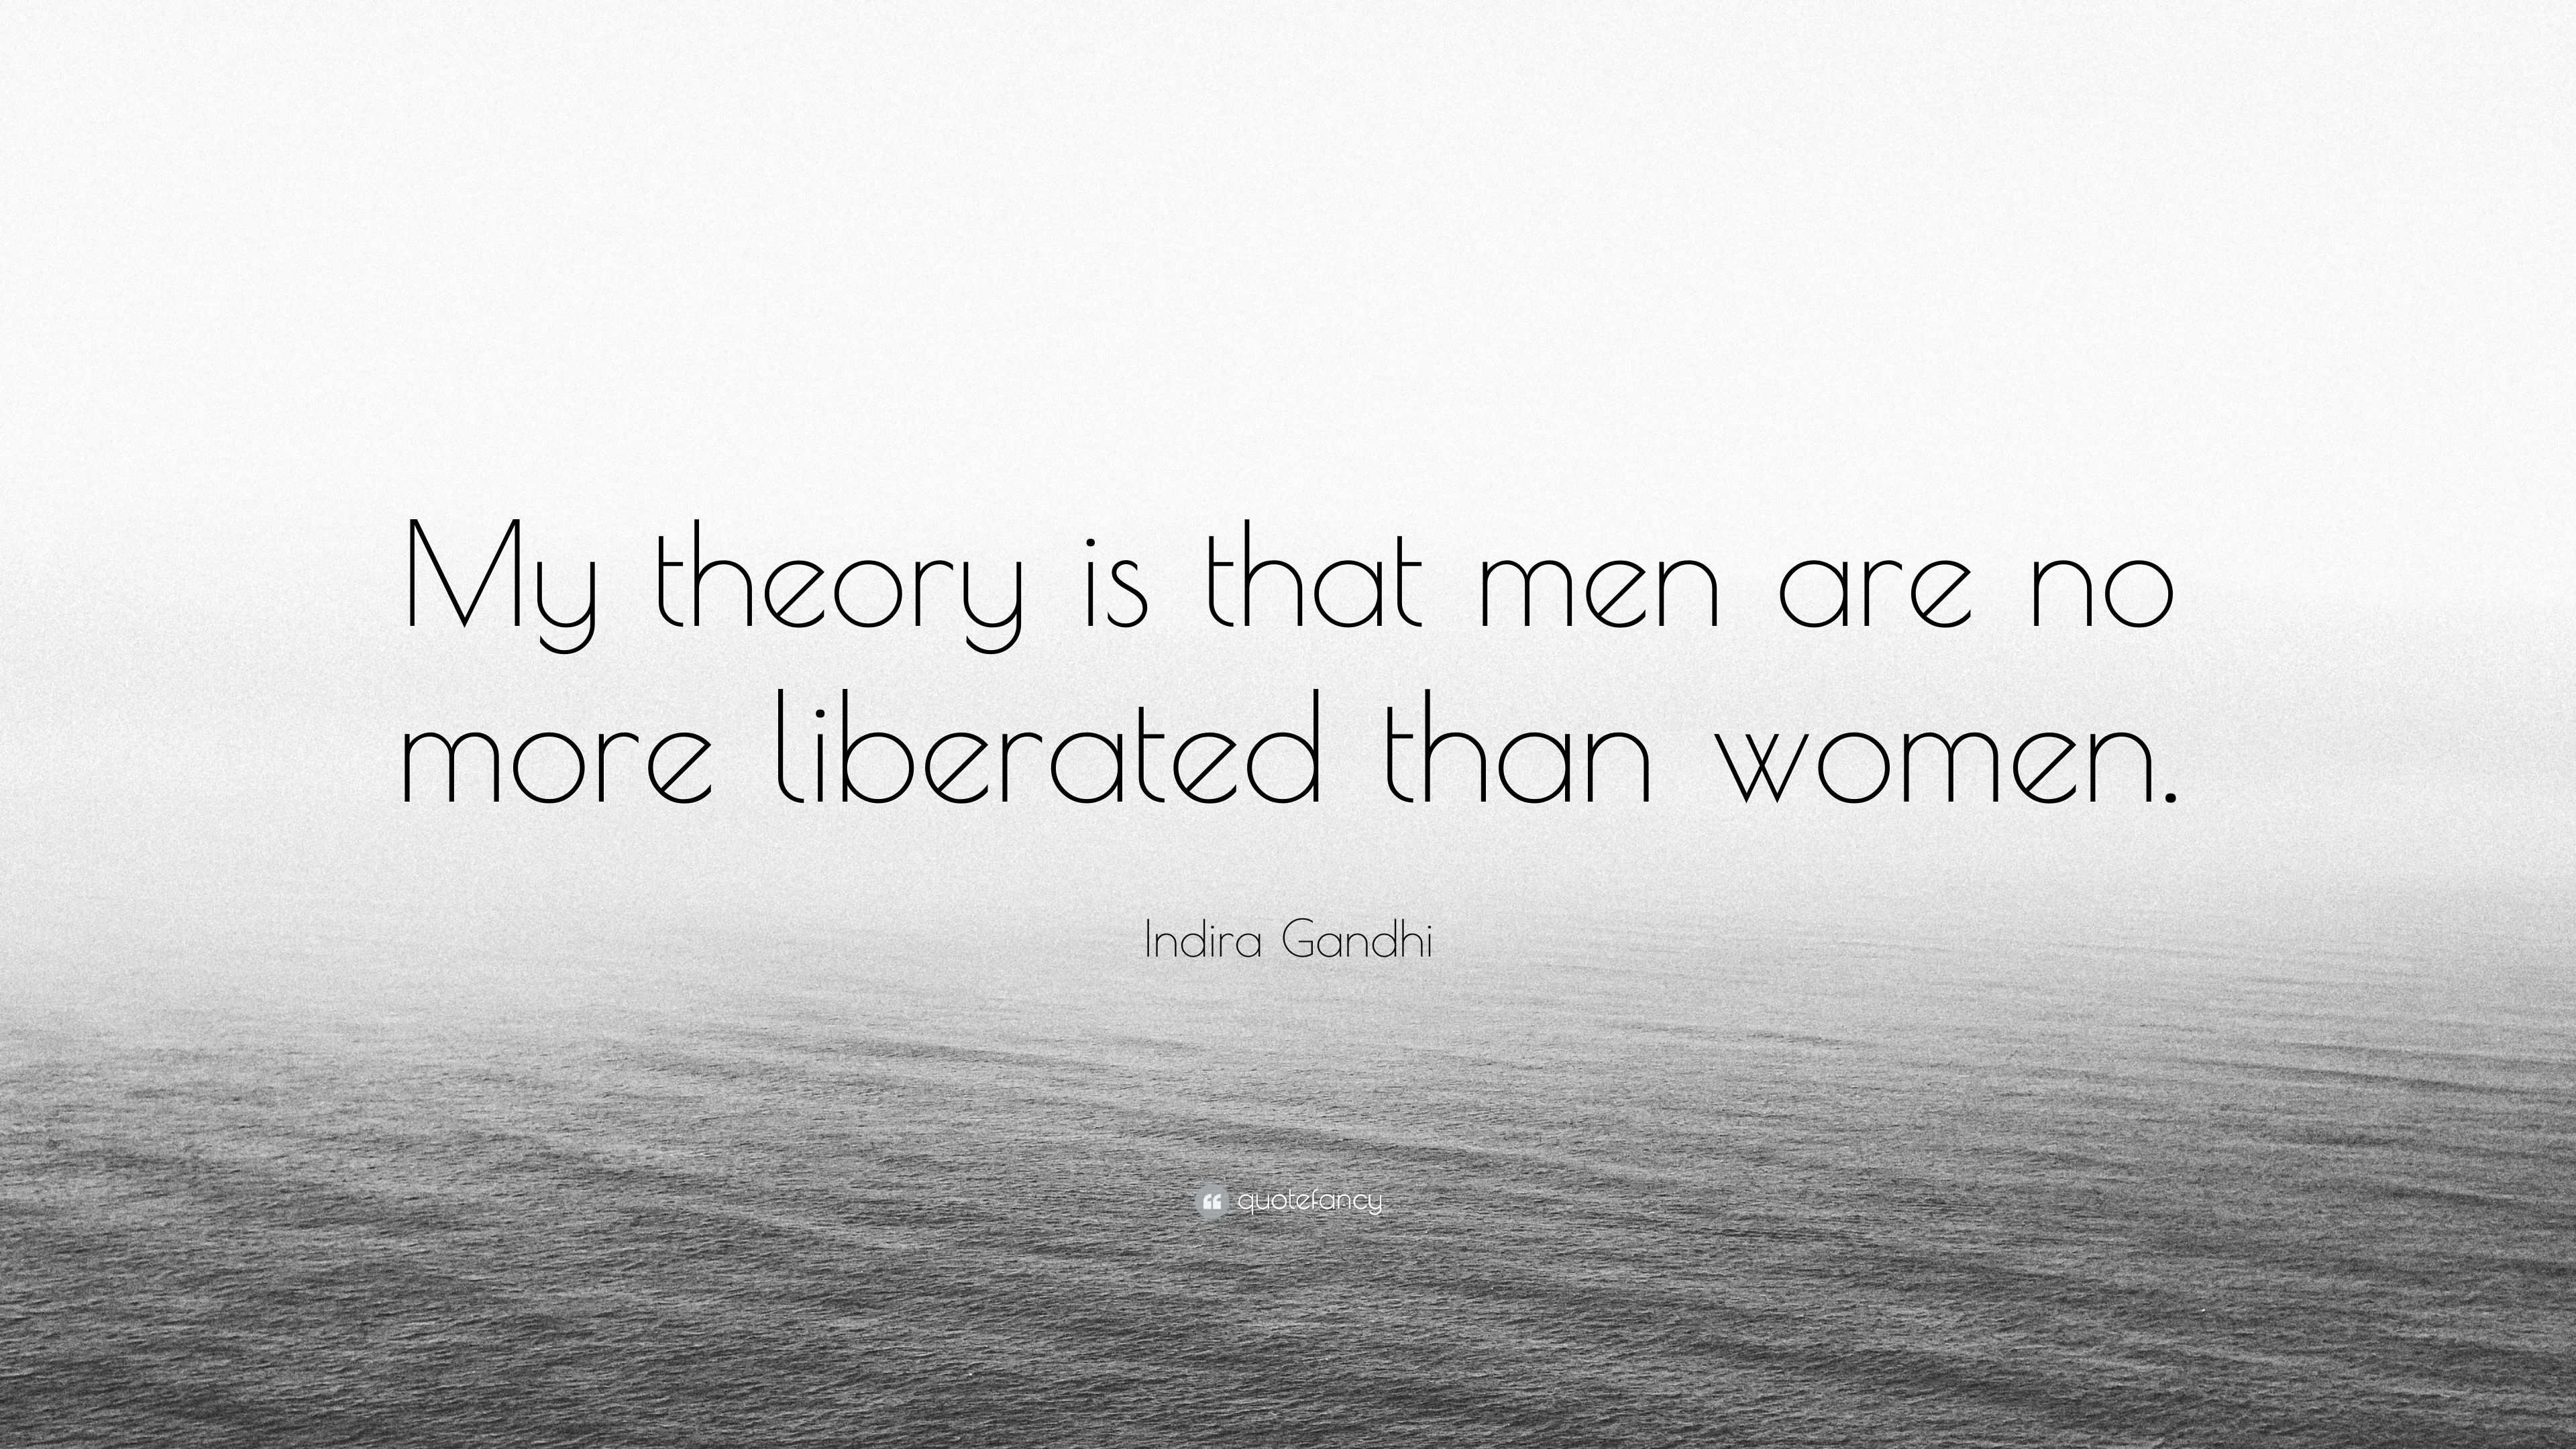 Indira Gandhi Quote: “My theory is that men are no more liberated